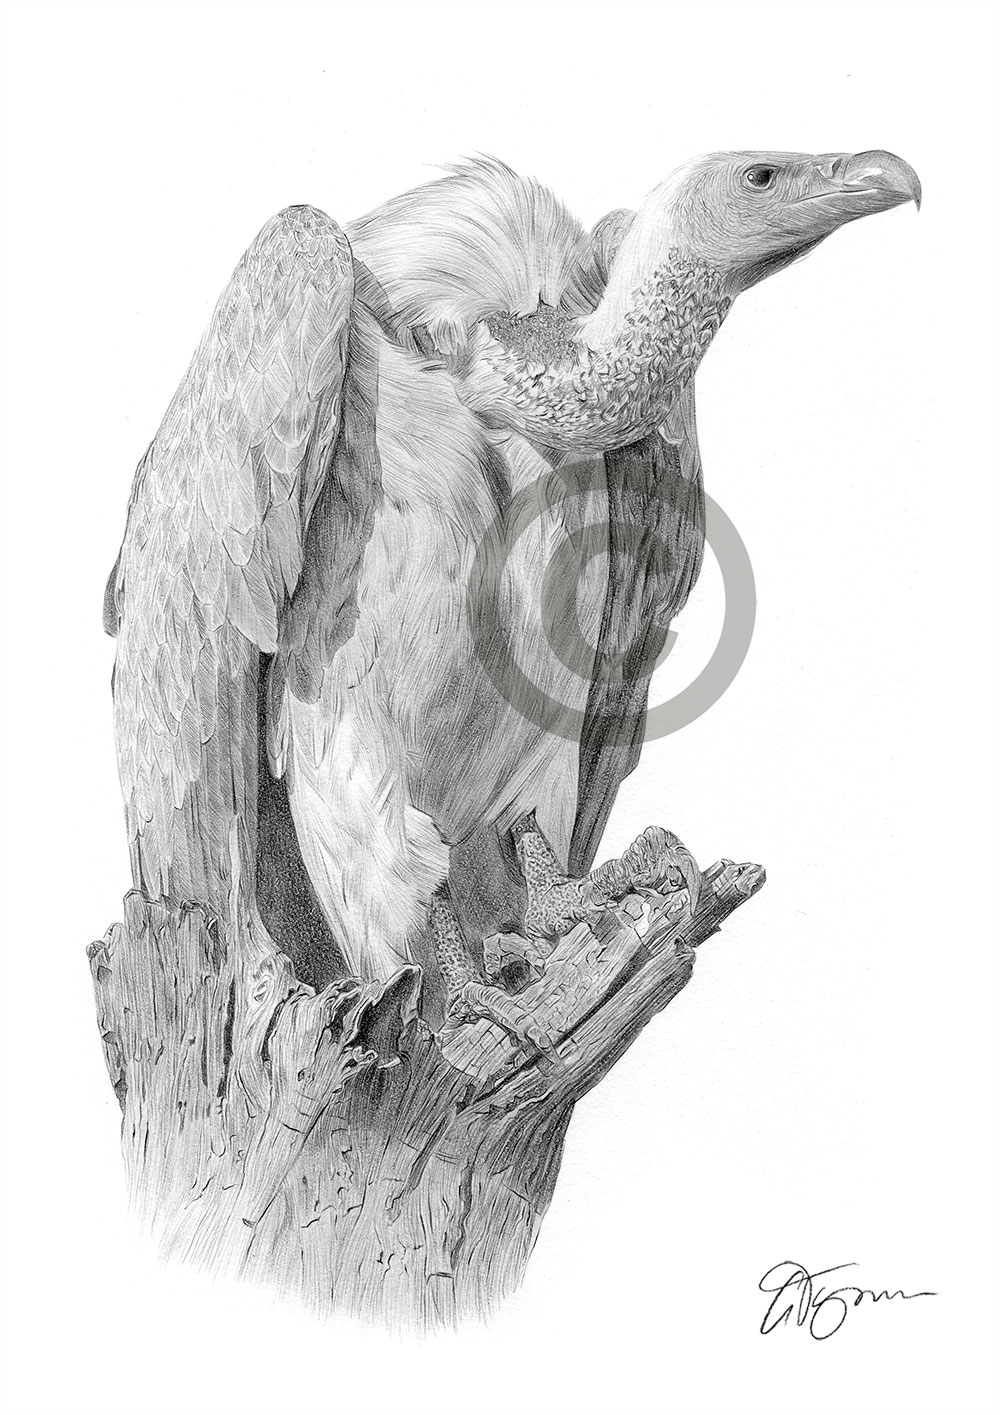 Pencil drawing of a vulture by UK artist Gary Tymon